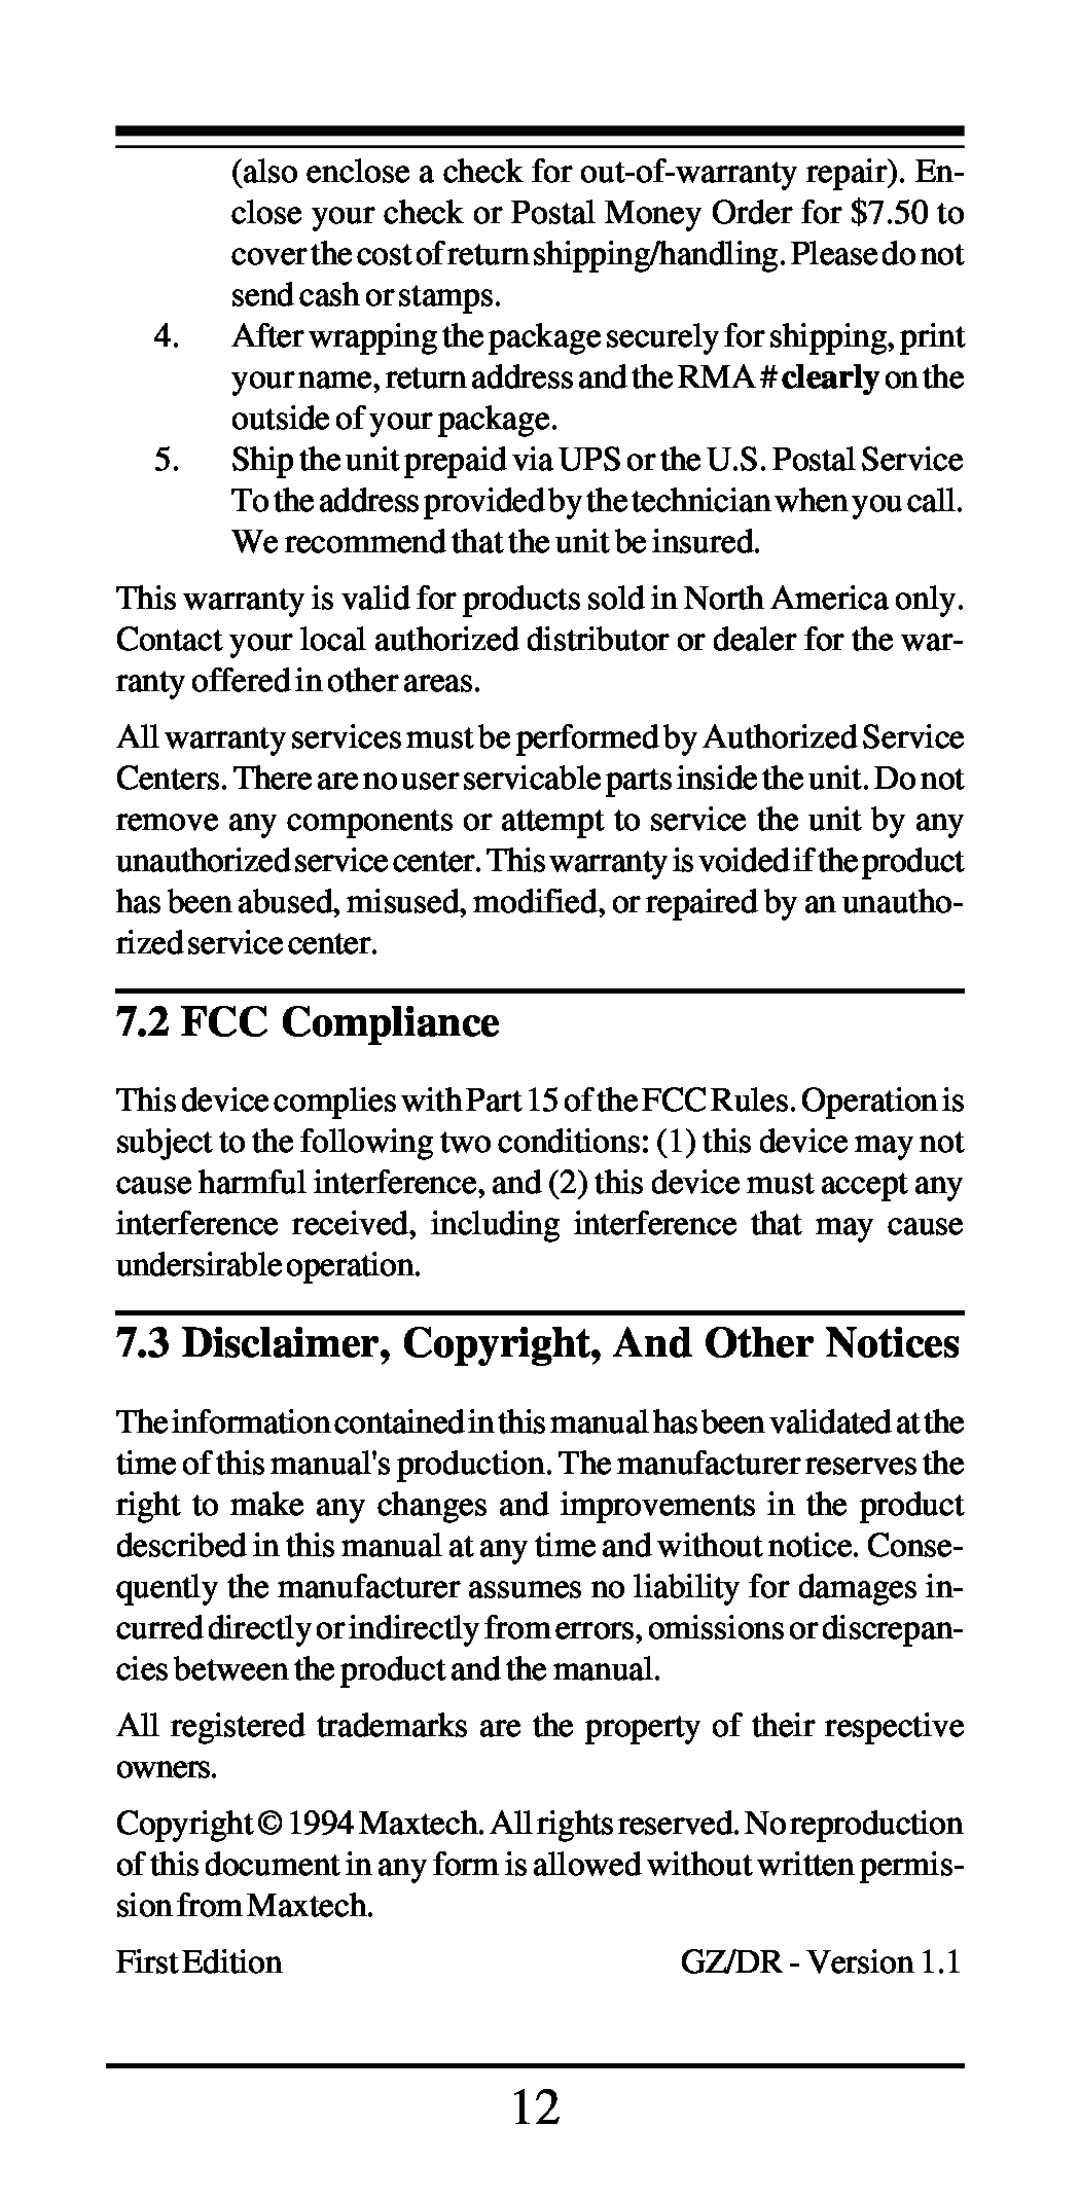 MaxTech NX-16 manual FCC Compliance, Disclaimer, Copyright, And Other Notices 